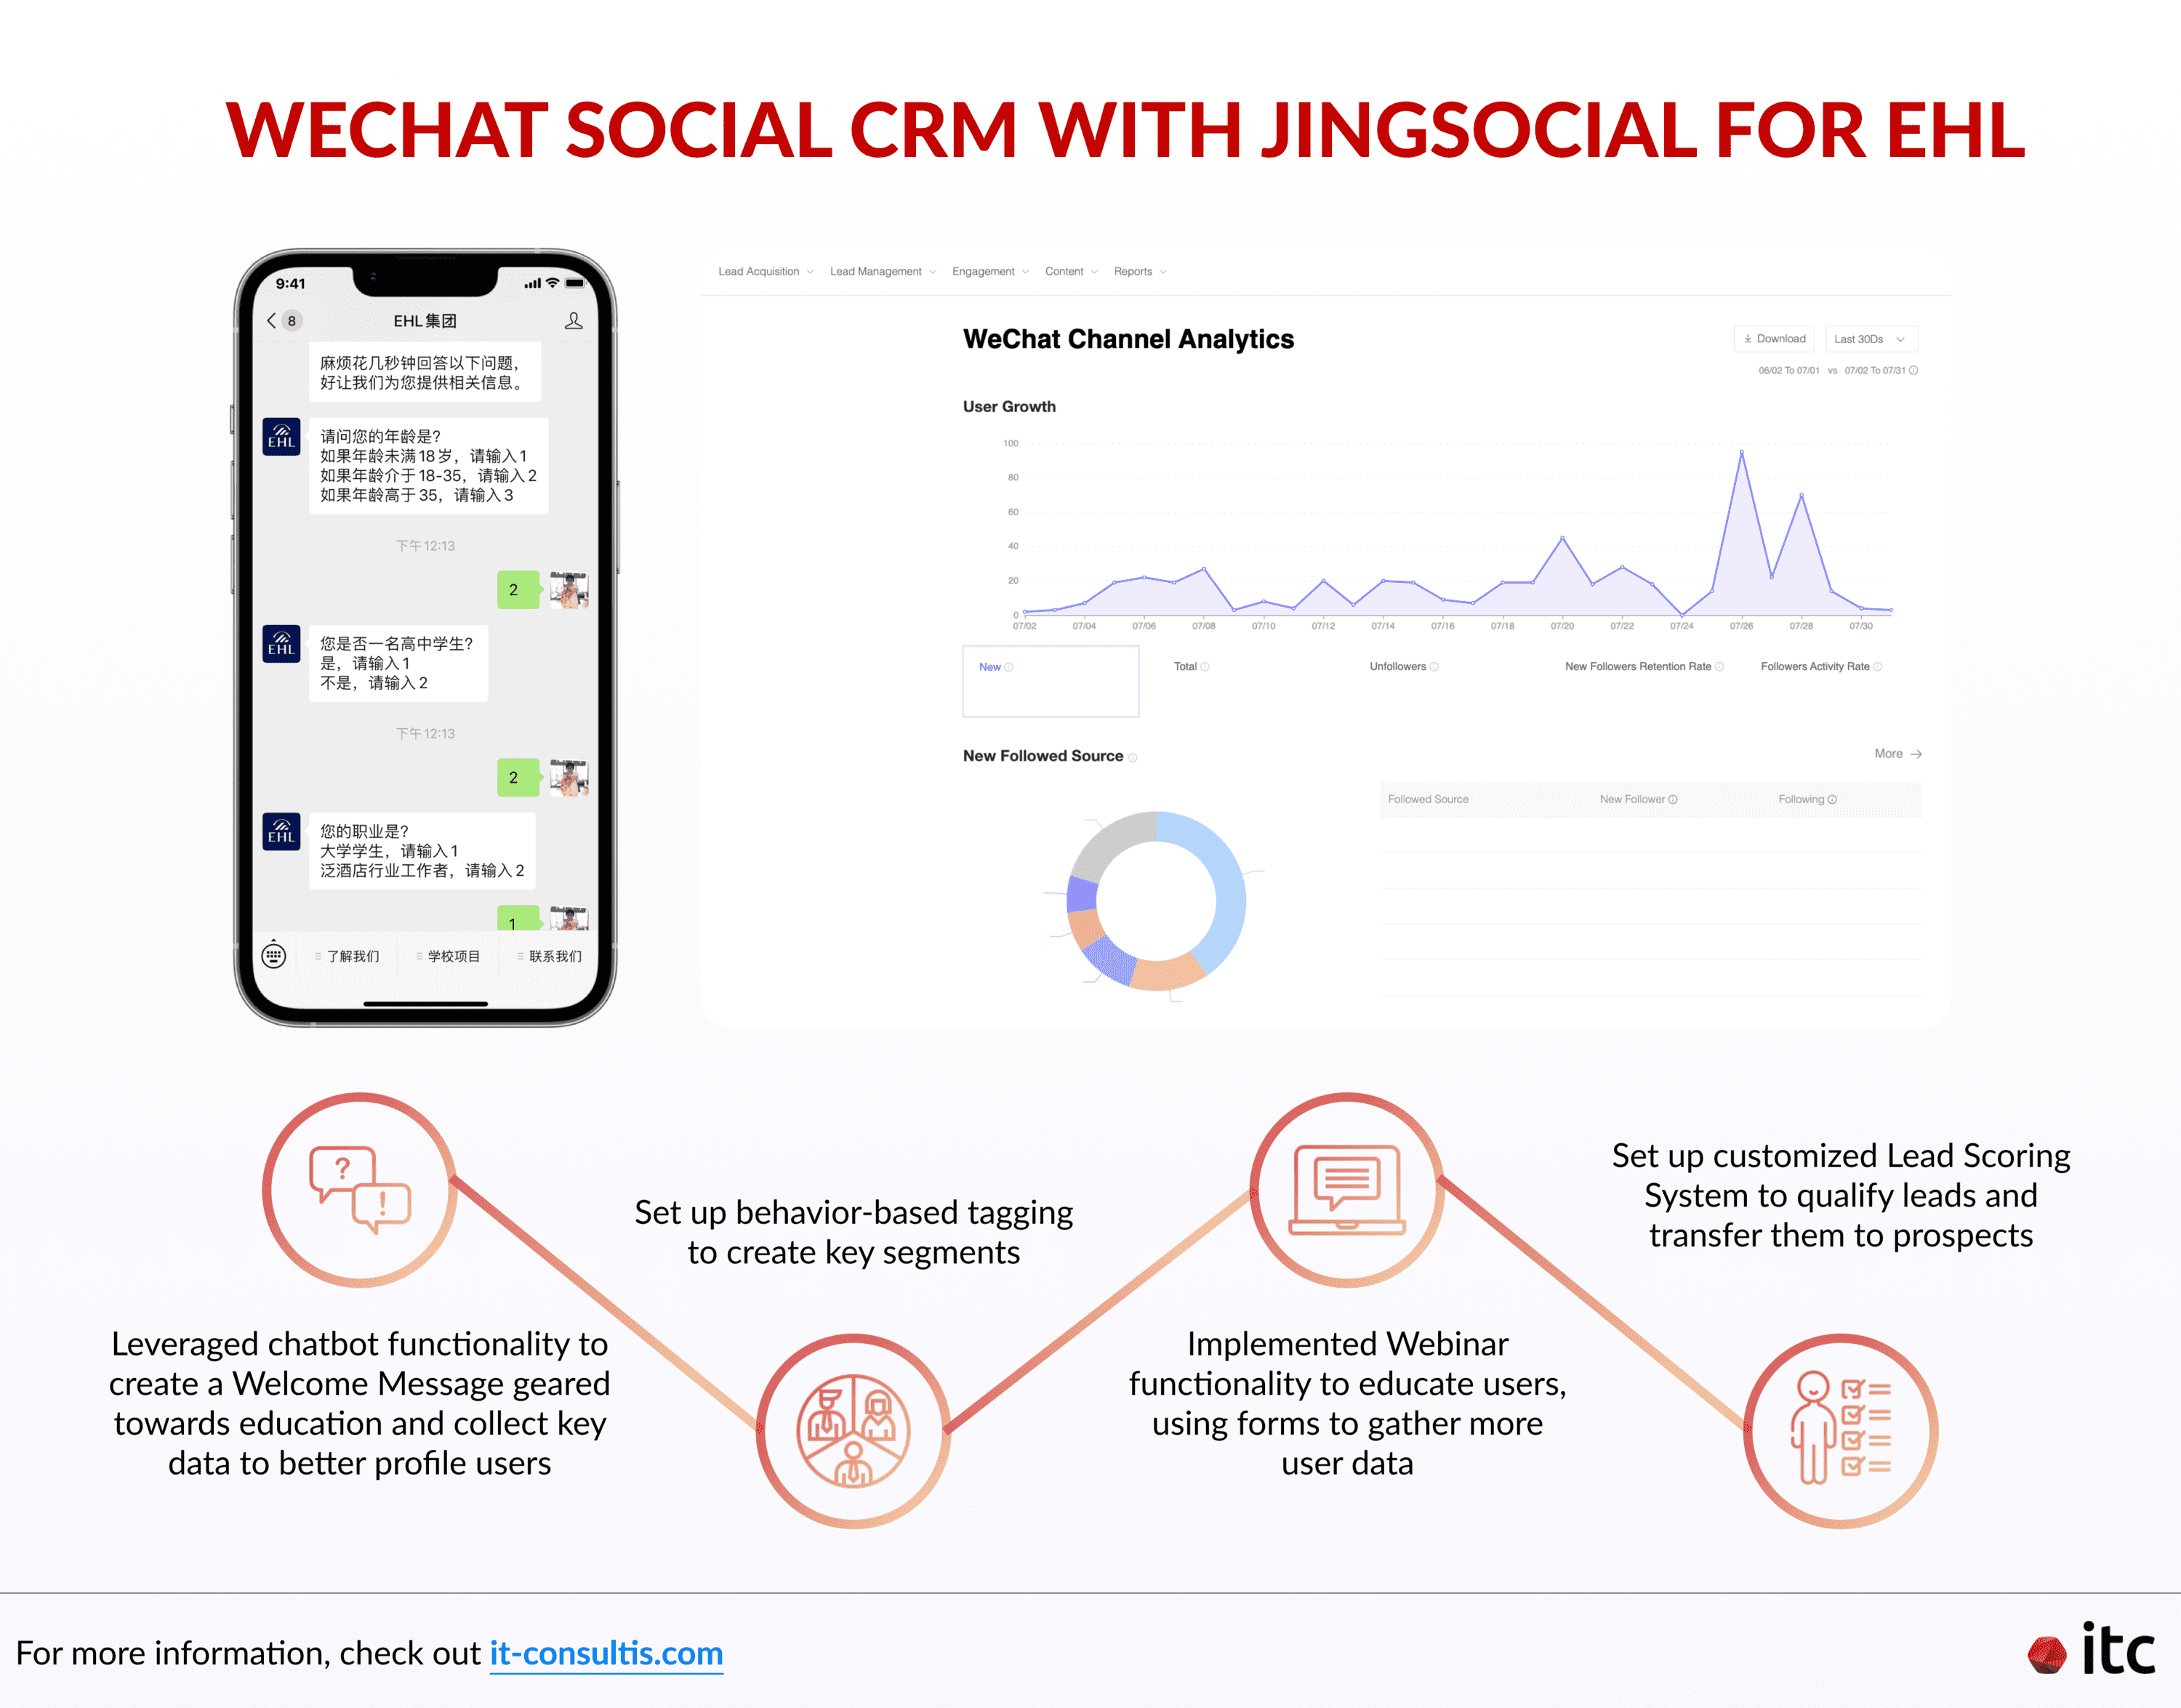 How ITC helped EHL do WeChat Social CRM with JingSocial, which requires processing user data to make automated decisions.